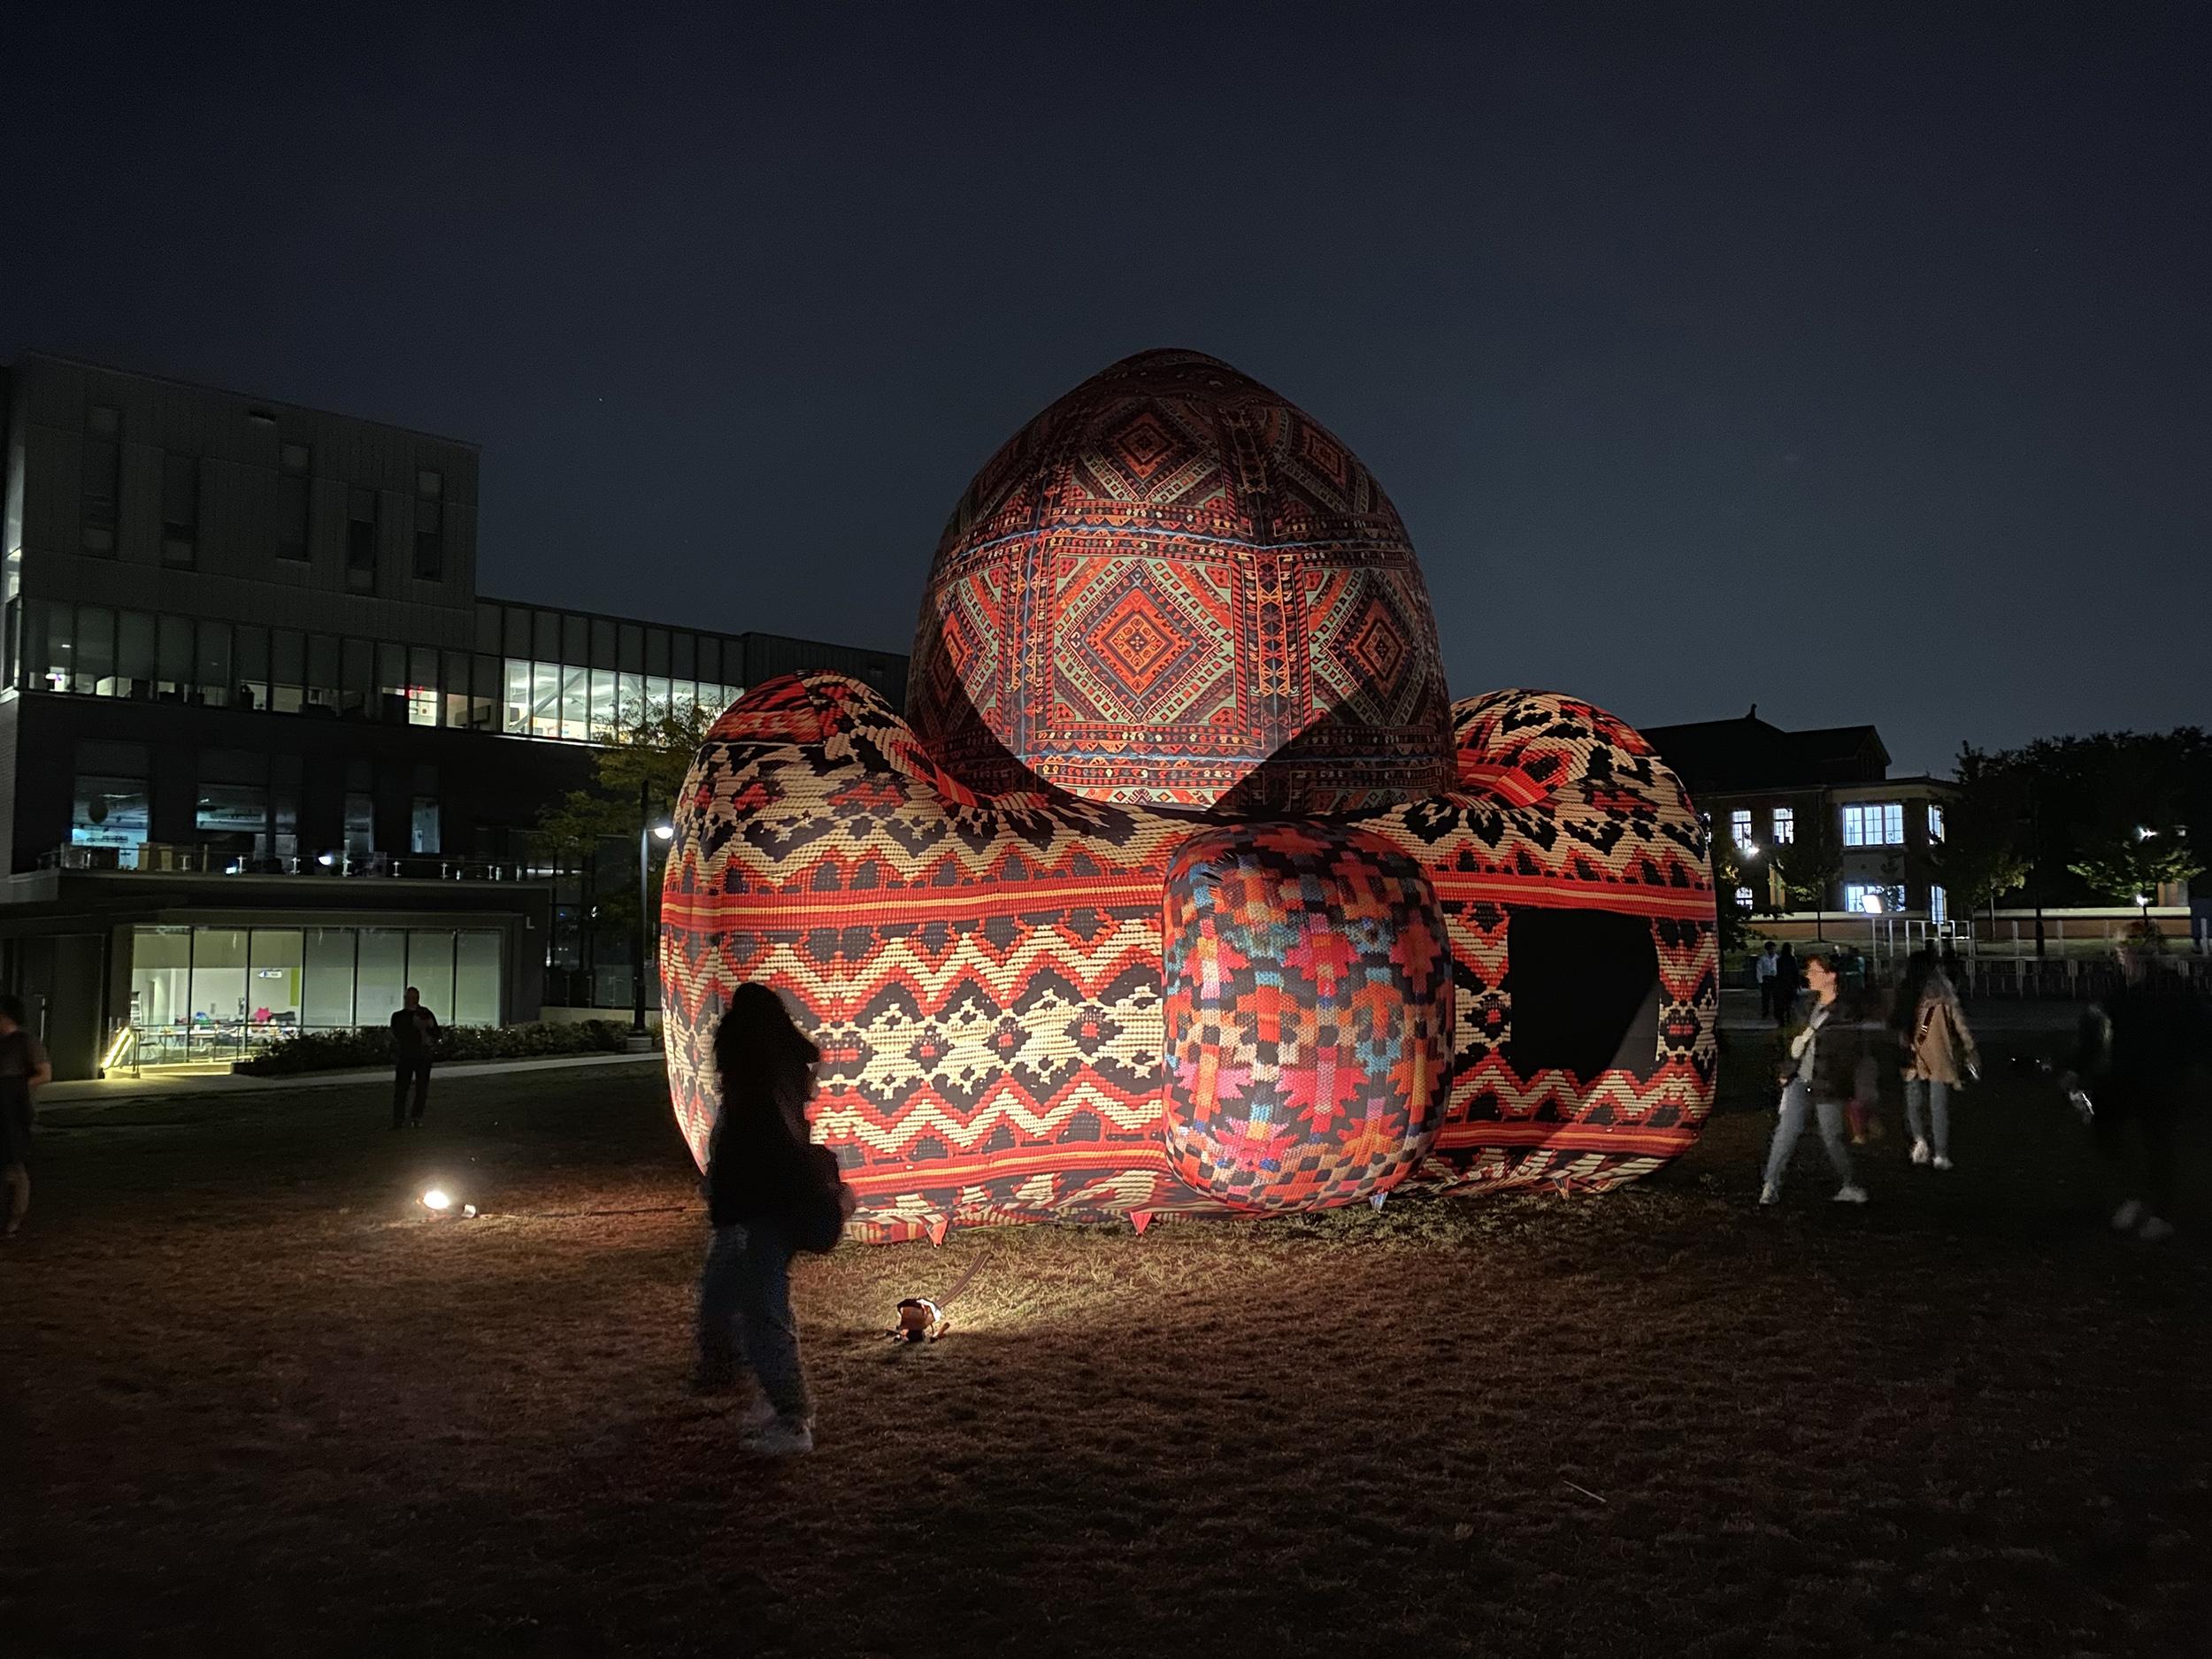 People walk past what appears to be an inflatable art project that’s lit up with lights.